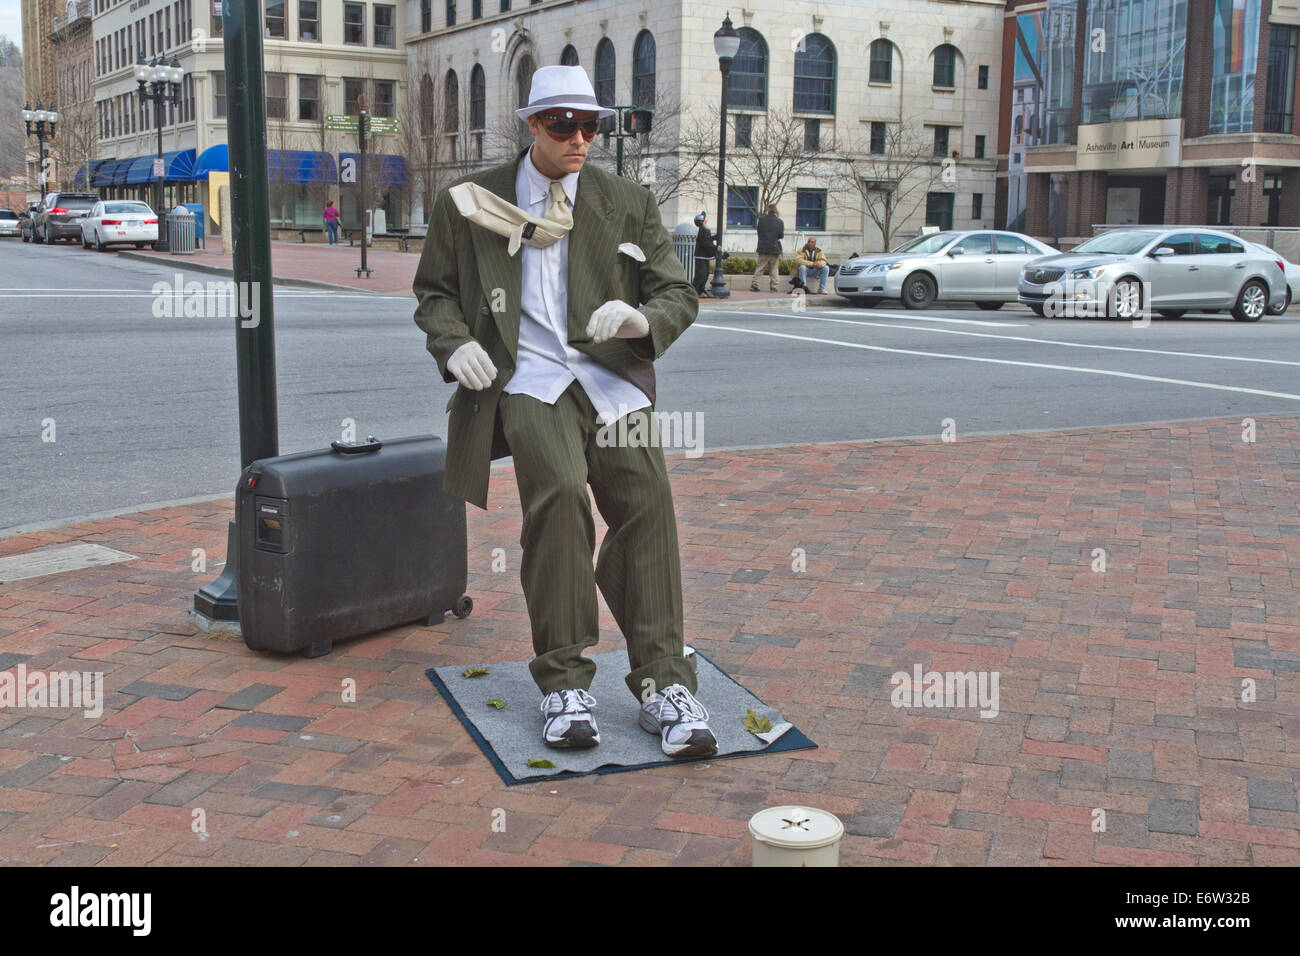 Asheville, North Carolina, USA - March 2, 2014: Living statue performance street artist showing a man in a suit being blown back Stock Photo